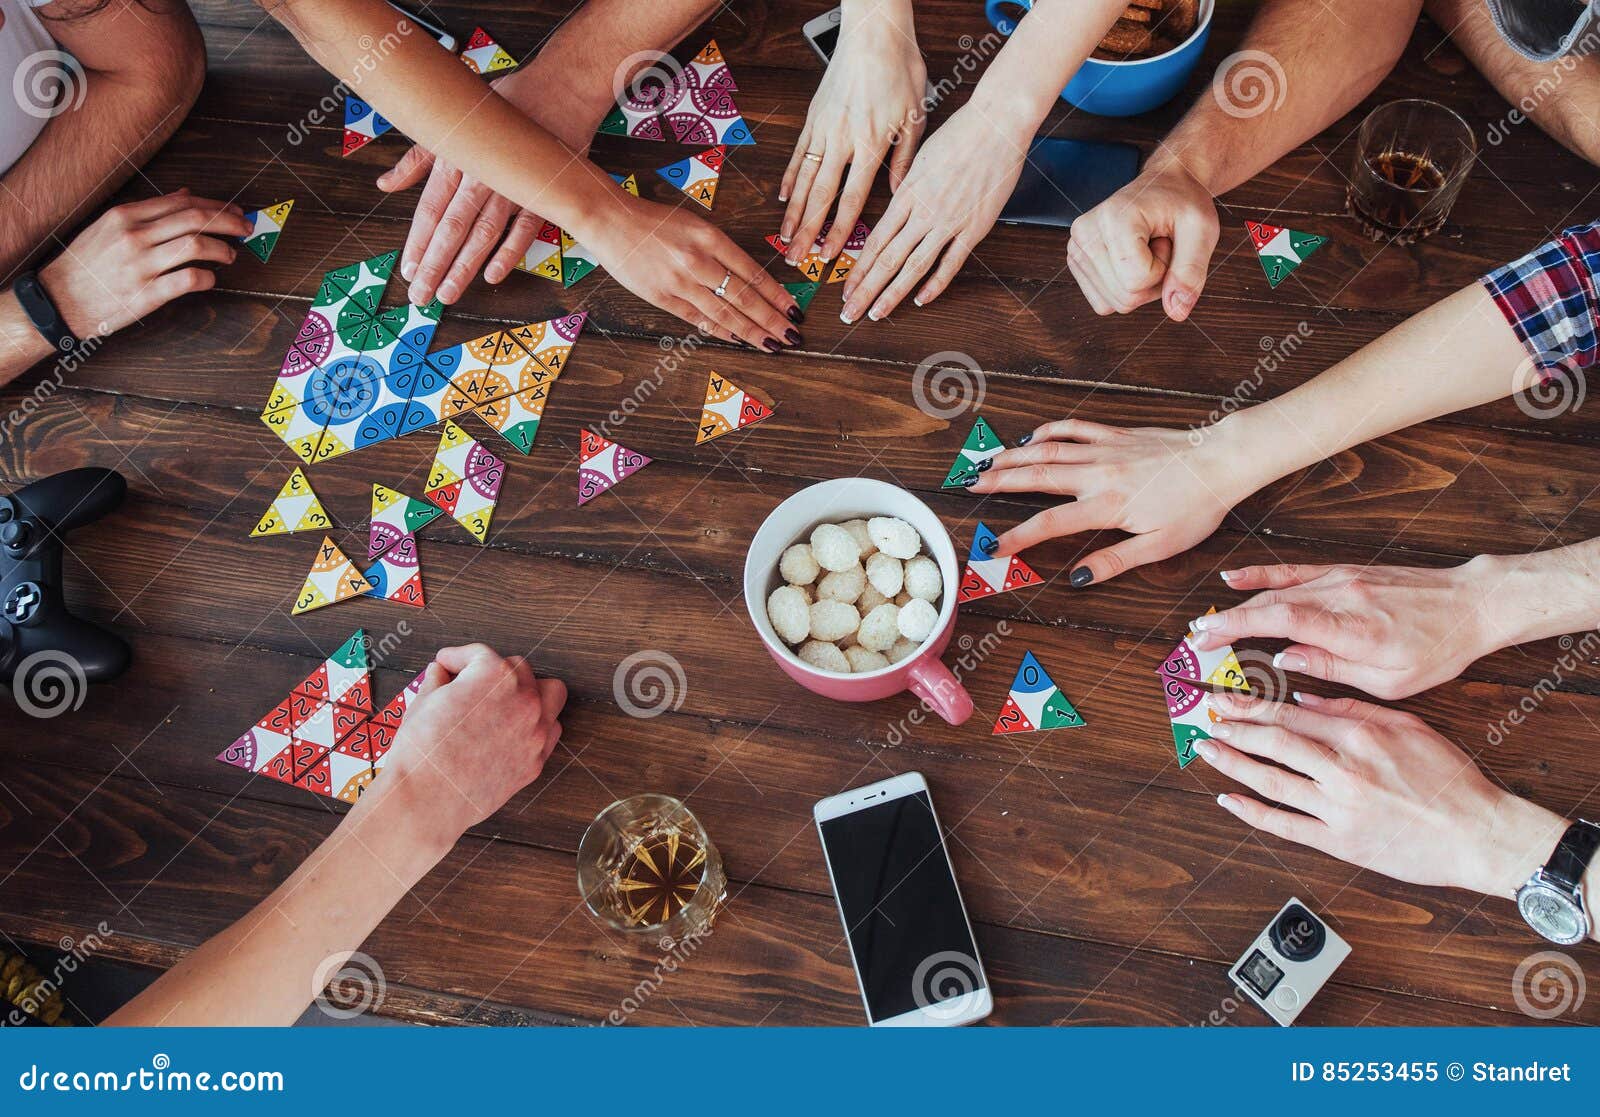 Top View Creative Photo Of Friends Sitting At Wooden Table Having Fun